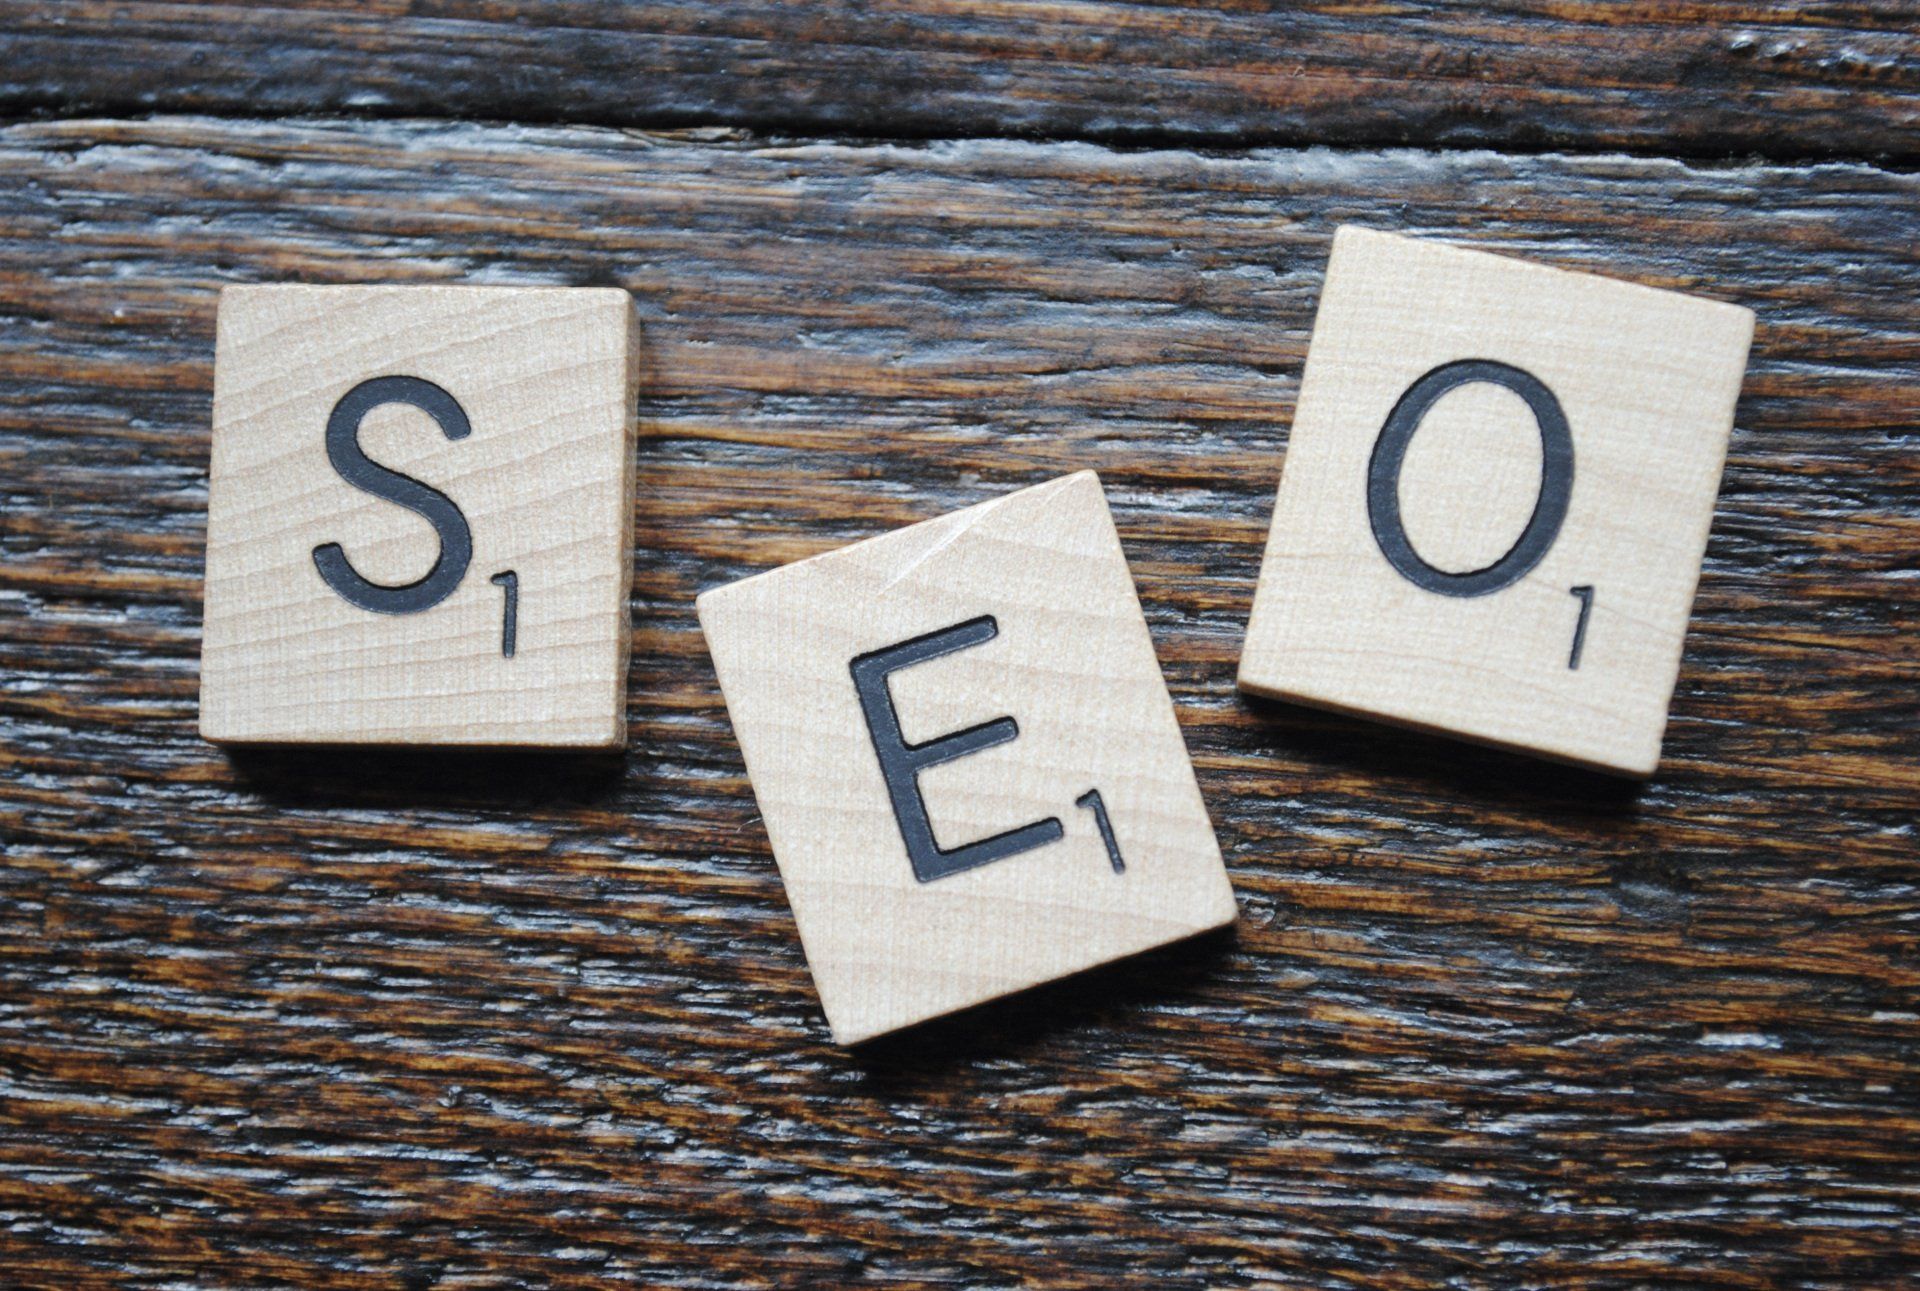 14 SEO Tips You Need to Implement Right Now, According to Our SEO Team